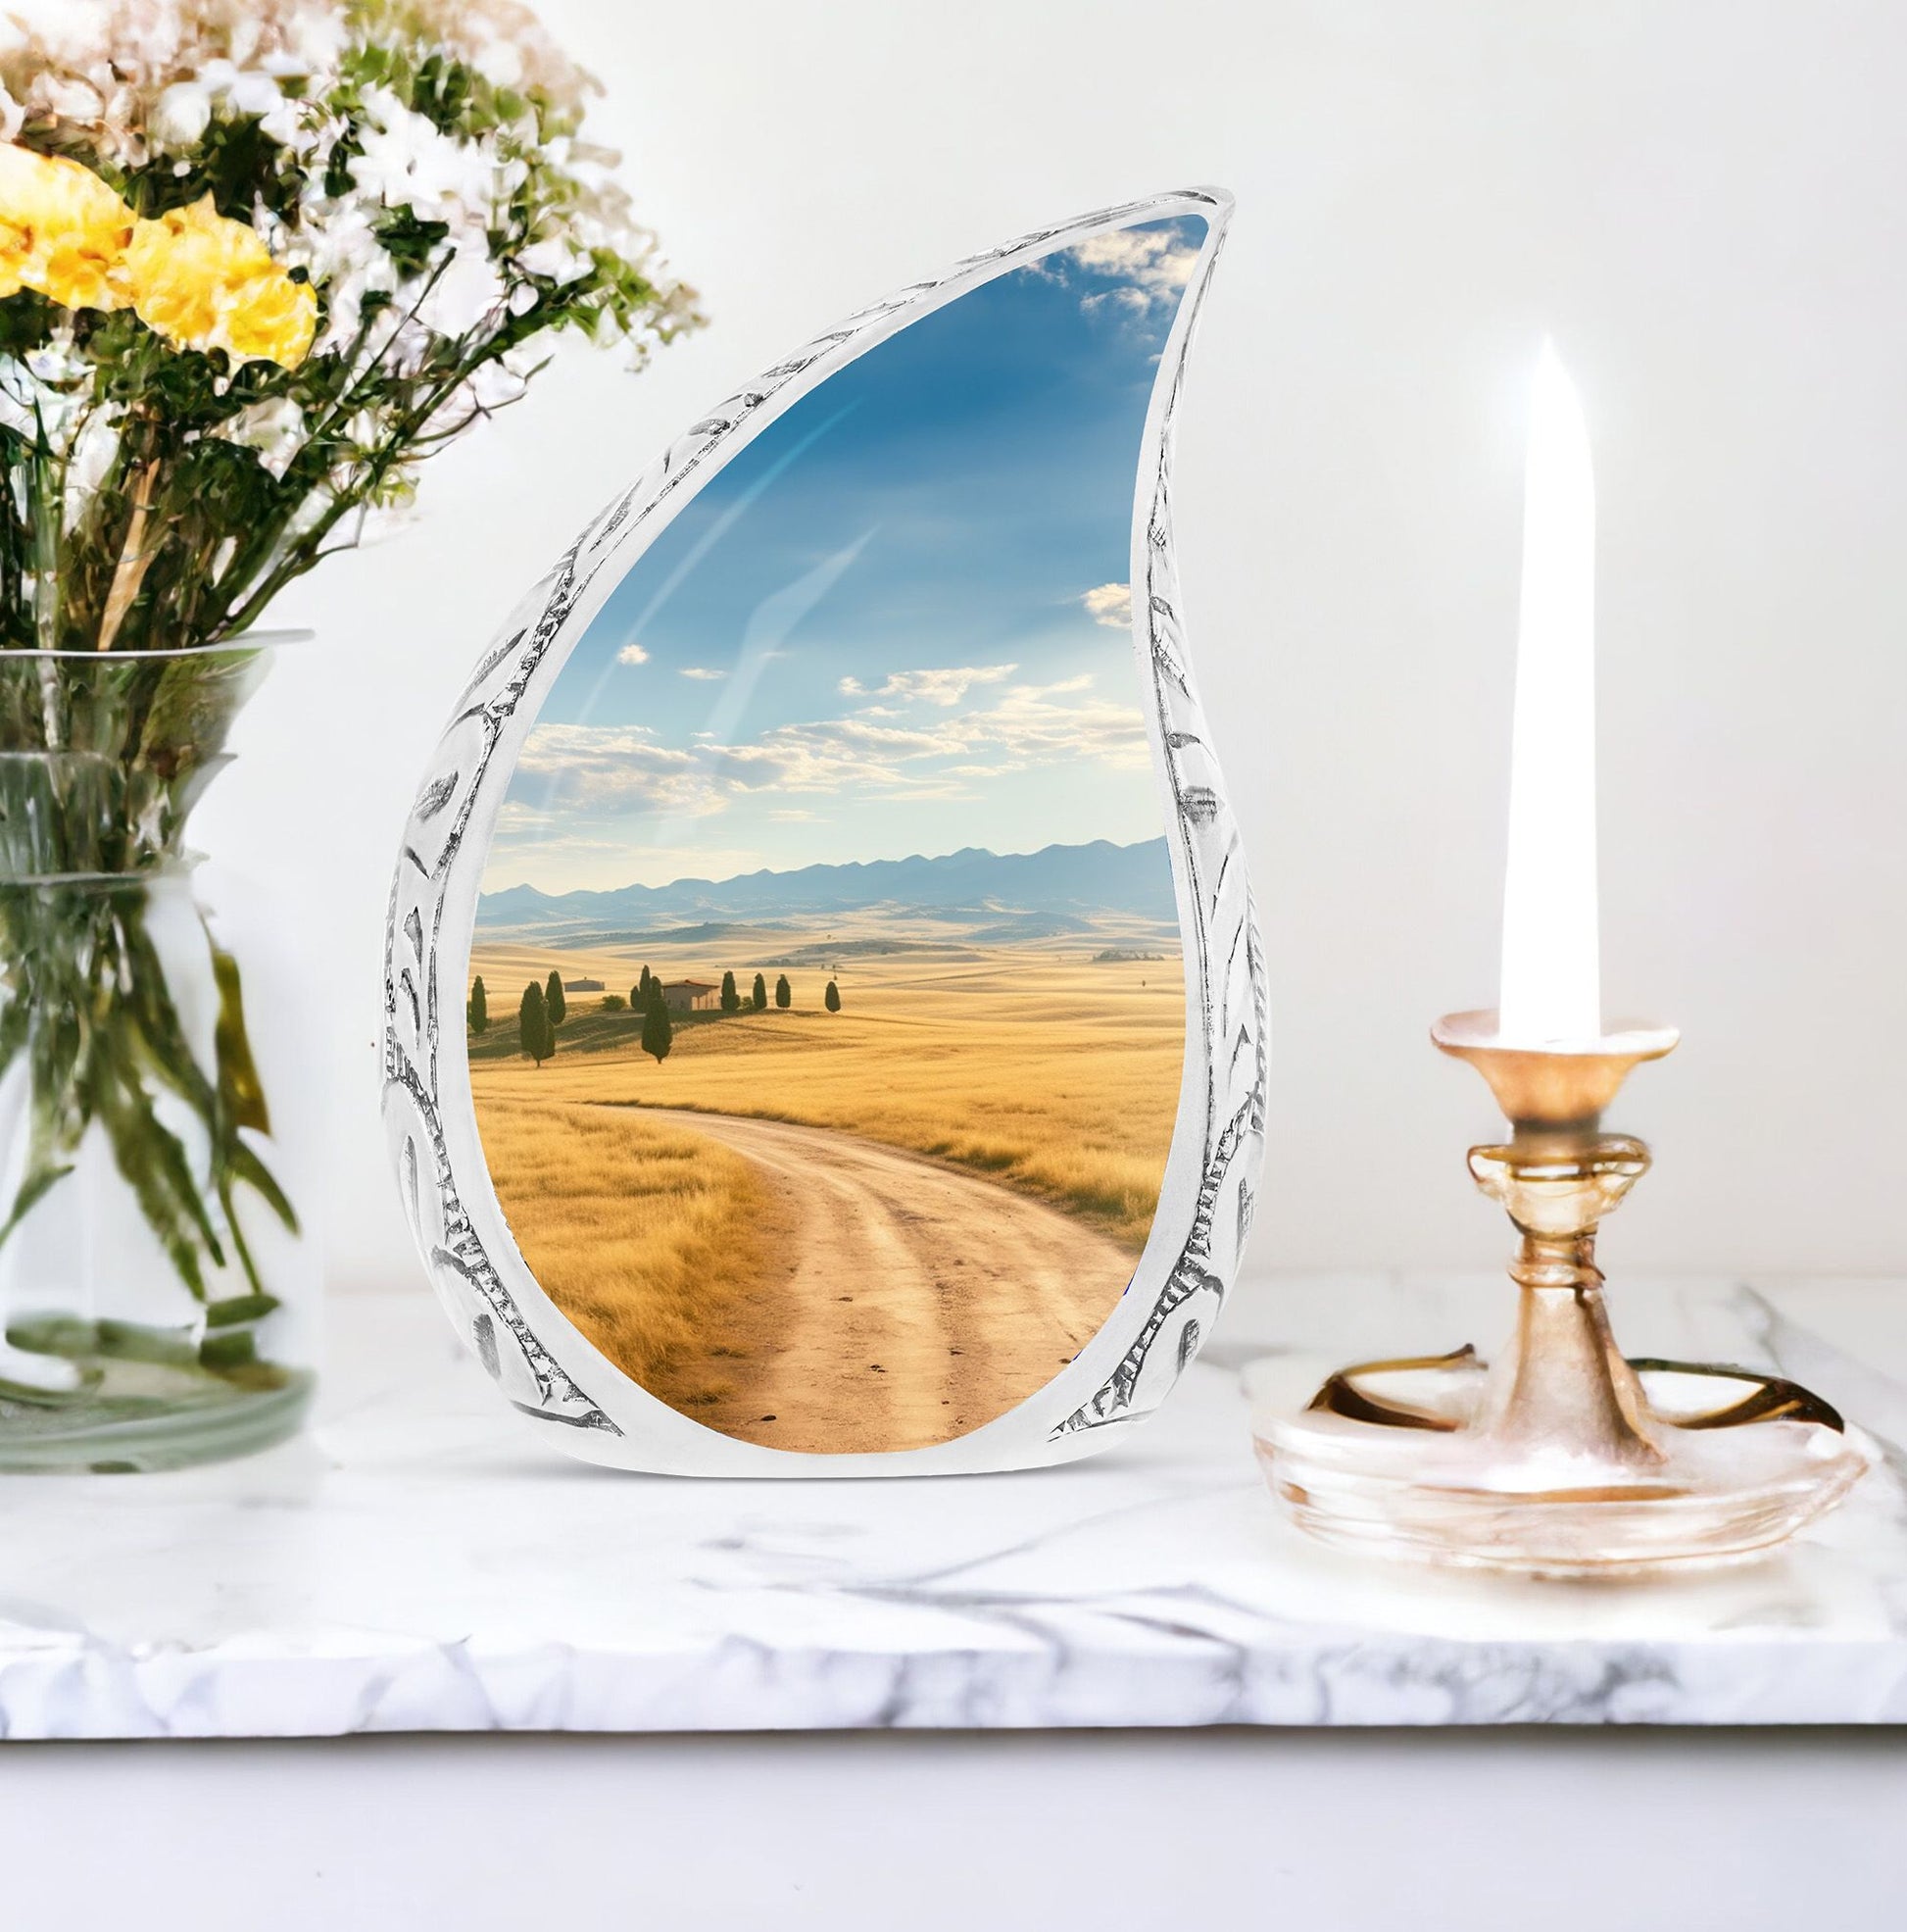 Amber Waves large cremation urn for ashes, suitable for adult female burial.